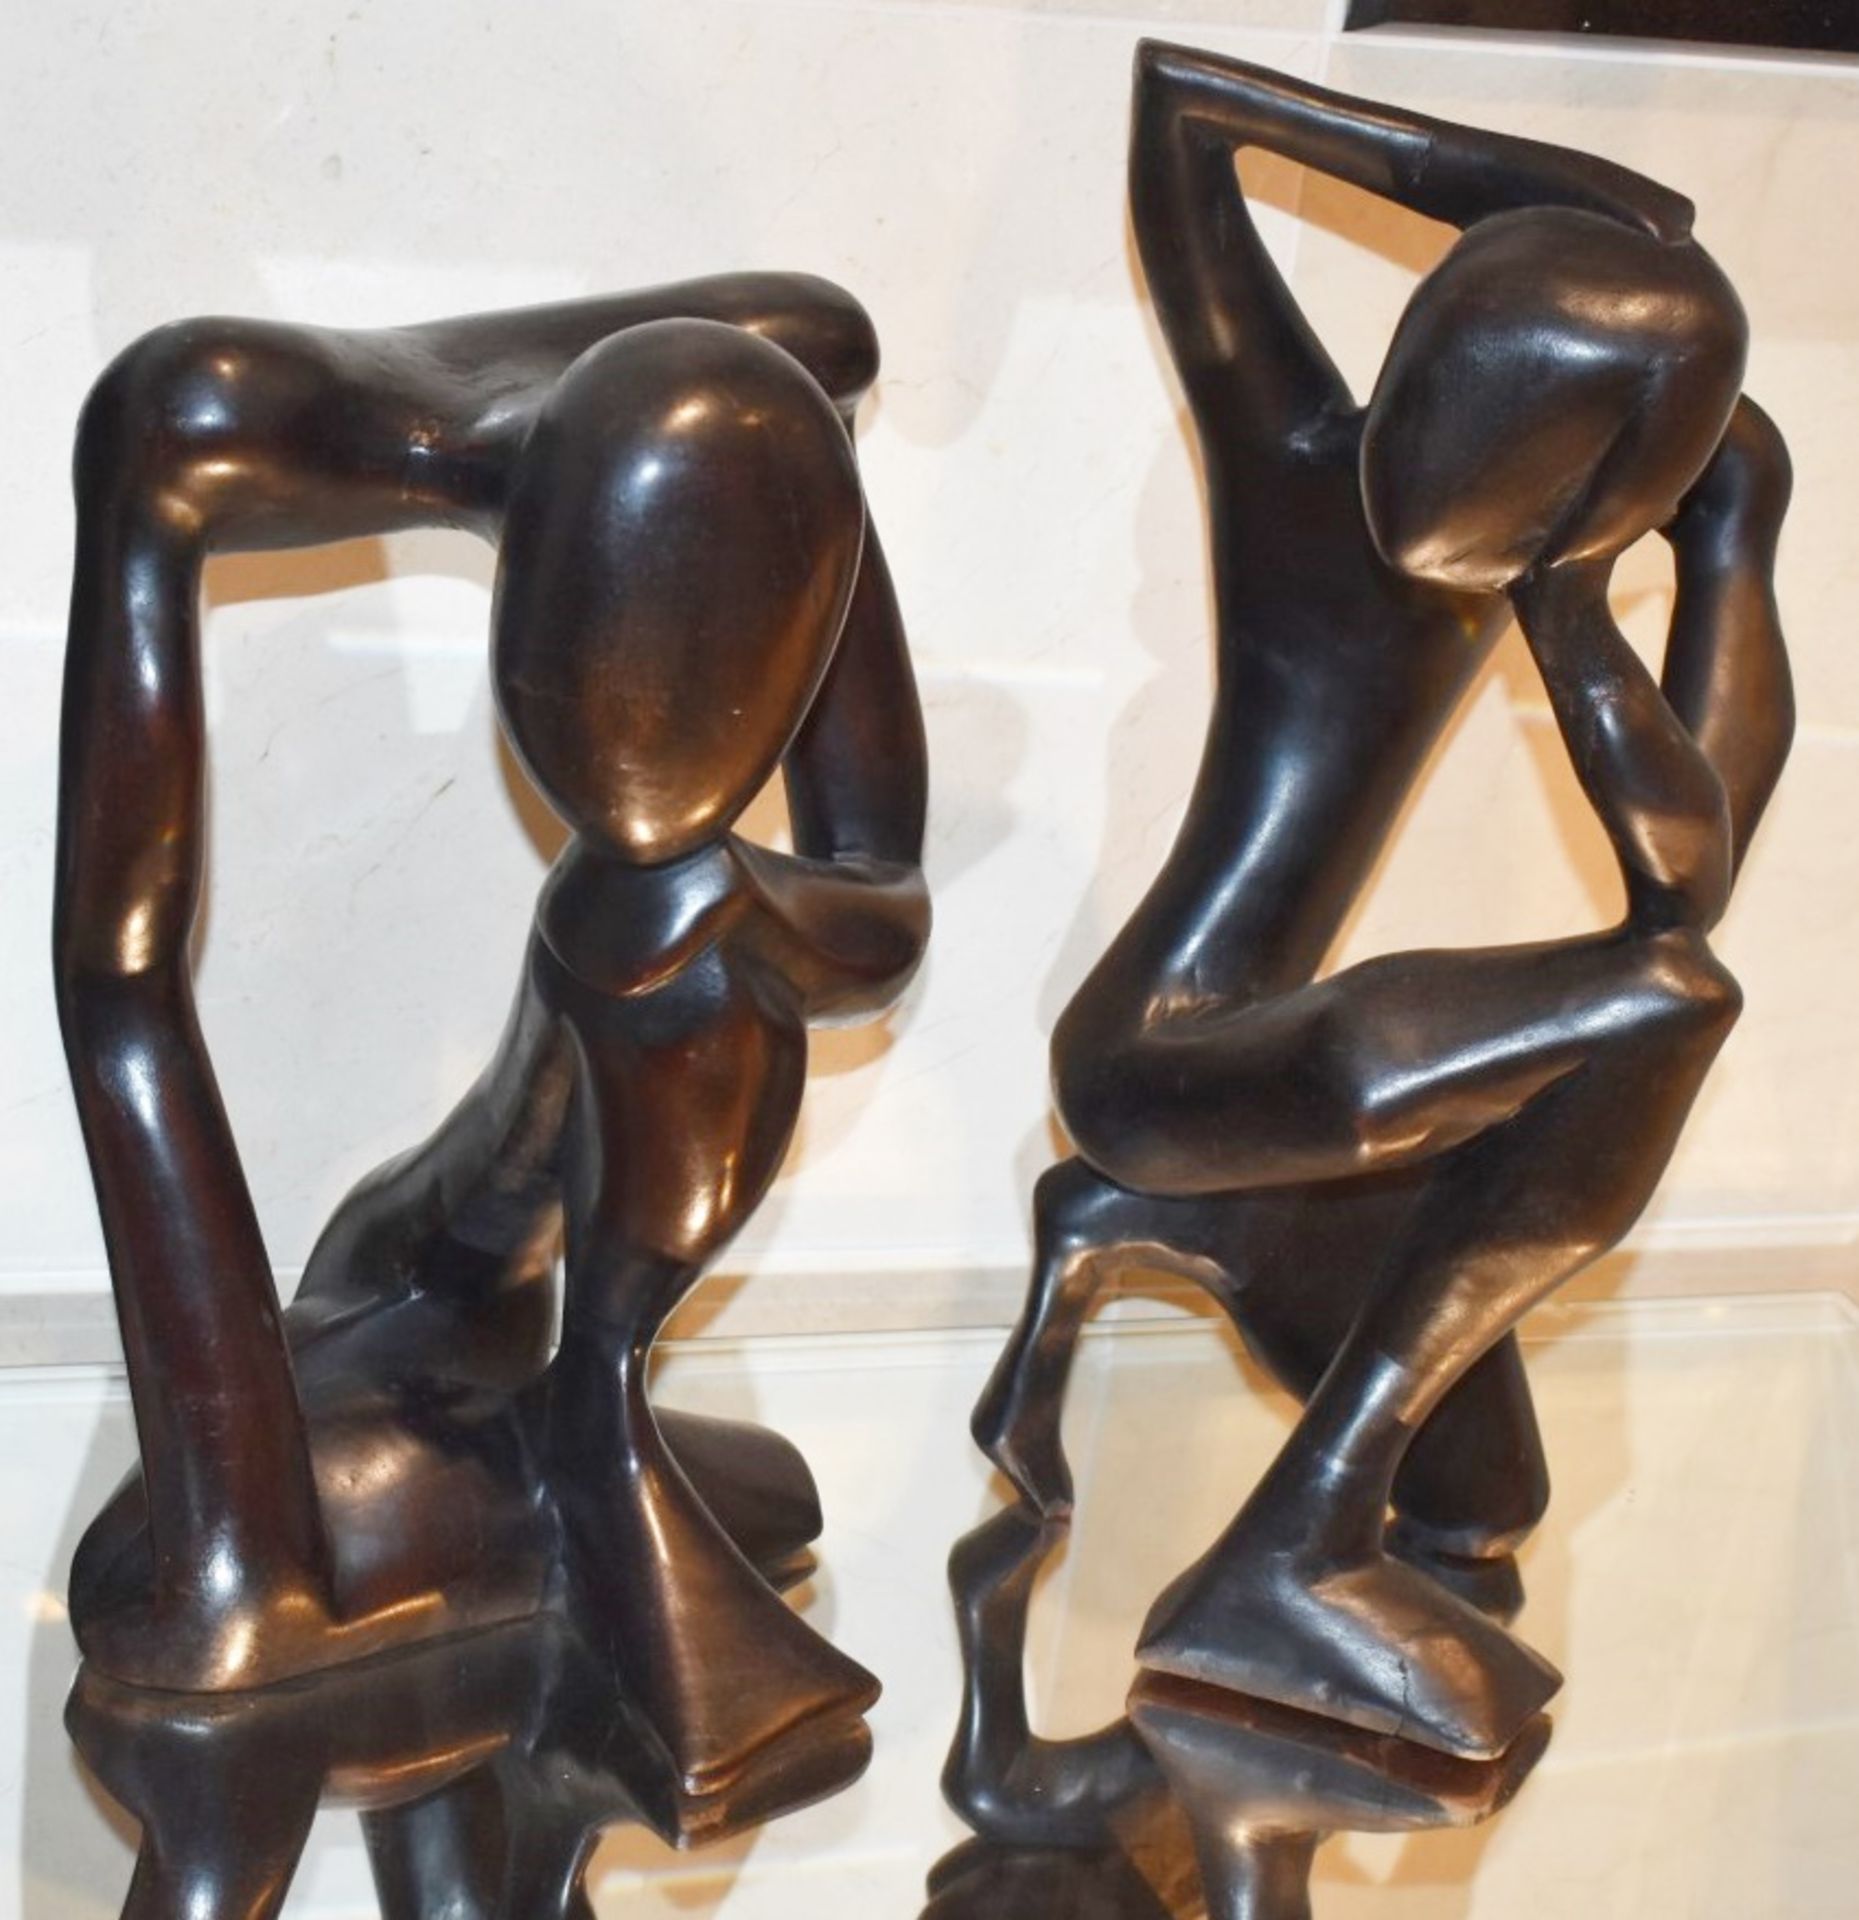 2 x Hand Carved Wooden Thinker Statues - Approx Size: H39 x W26 xD18 cms - CL546 - Location: Hale,